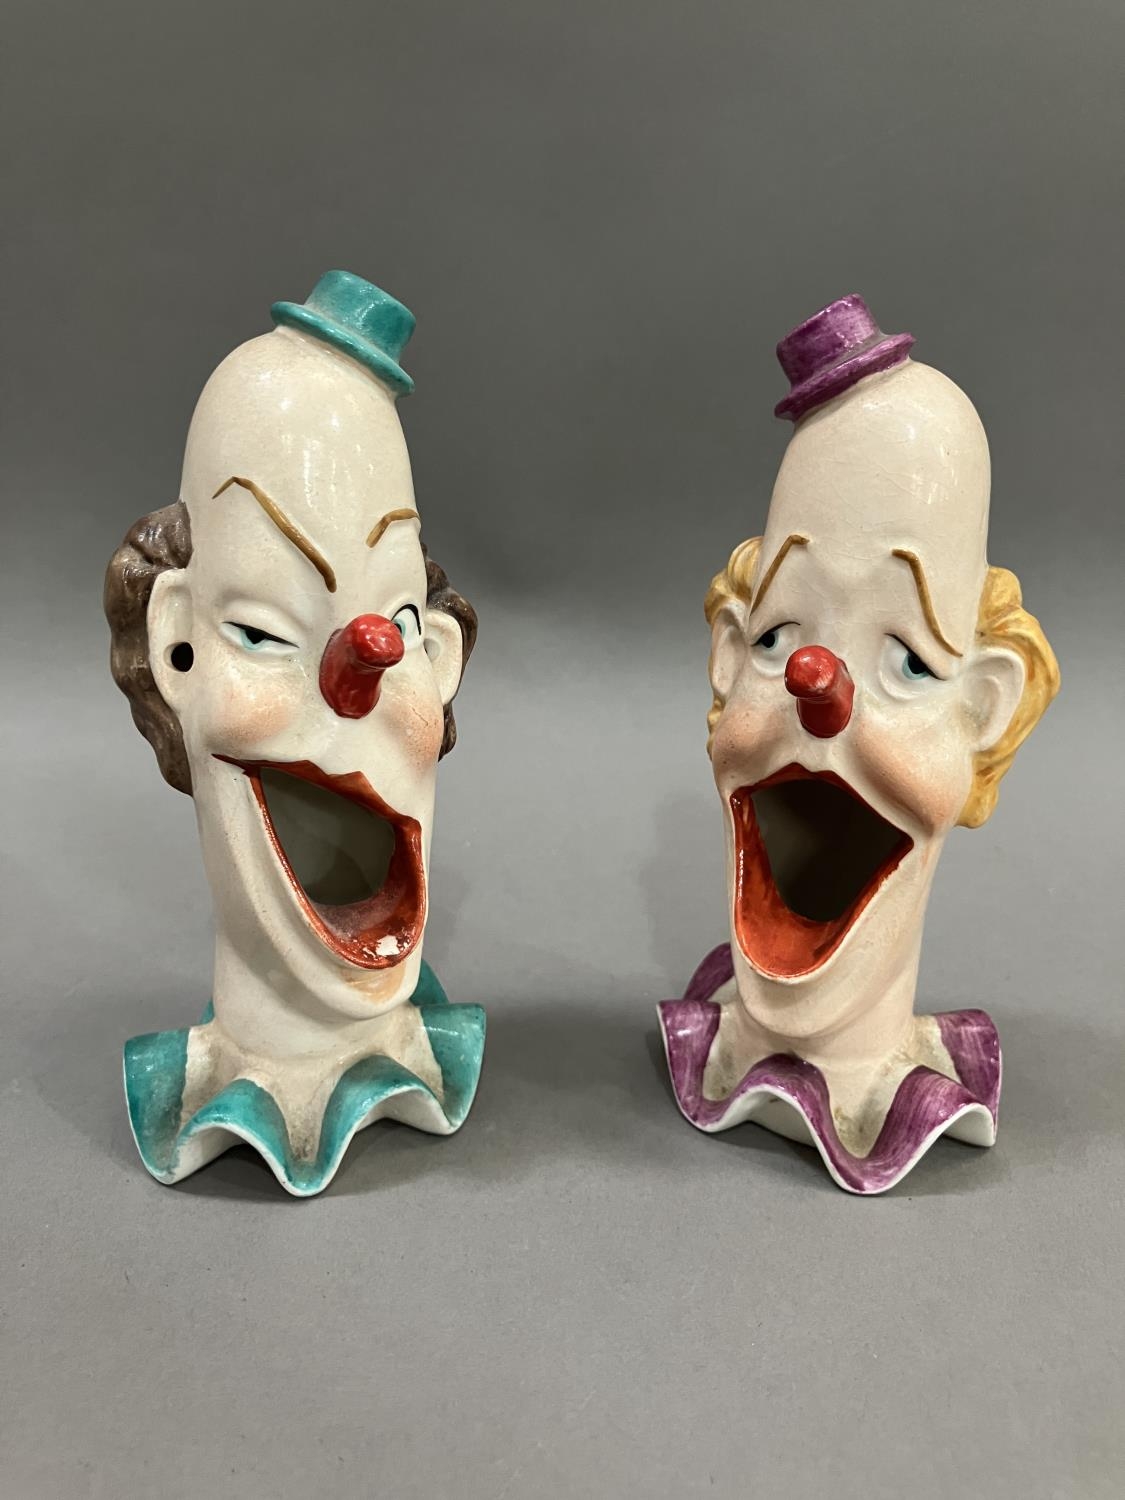 A pair of ceramic clowns heads on ruffled collars with gaping mouths, 15cm high - Image 2 of 5